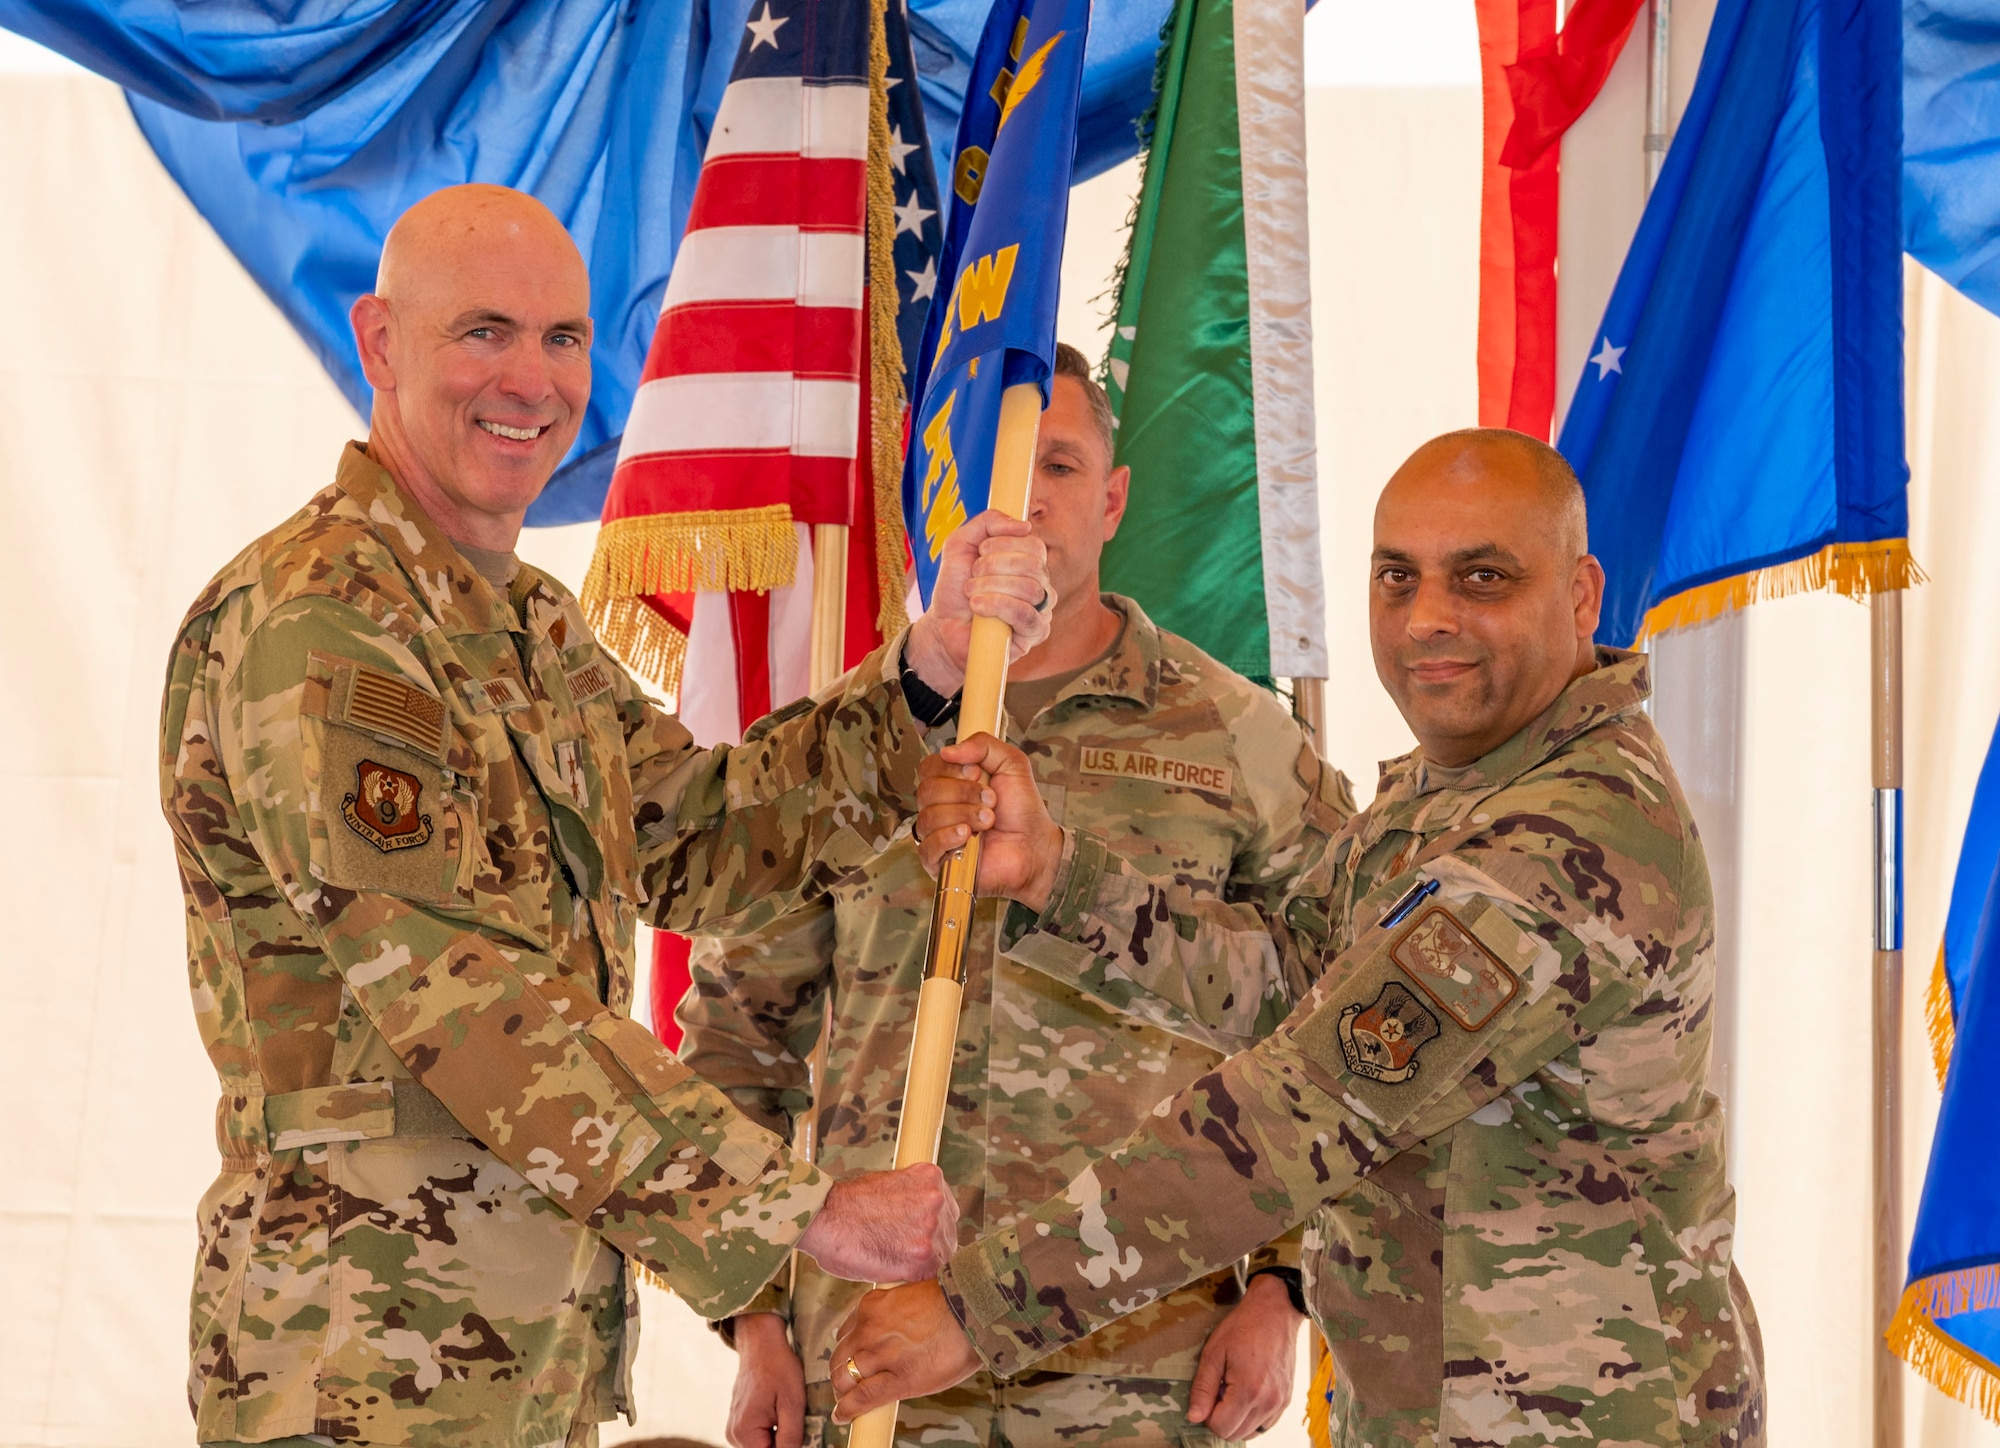 U.S. Air Force Brig. Gen. Akshai Gandhi, right, incoming commander of the 378th Air Expeditionary Wing, assumes command from Maj. Gen. Clark Quinn, left, Ninth Air Force deputy commander, during a change of command ceremony at Prince Sultan Air Base, Kingdom of Saudi Arabia, May 18, 2023. During the ceremony, Brig. Gen. William Betts relinquished command of the 378th AEW to Gandhi. The tradition of change of command ceremonies are to allow service members to witness their new leader assume the responsibility and trust associated with the position of commander. (U.S. Air Force photo by Senior Airman Stephani Barge)